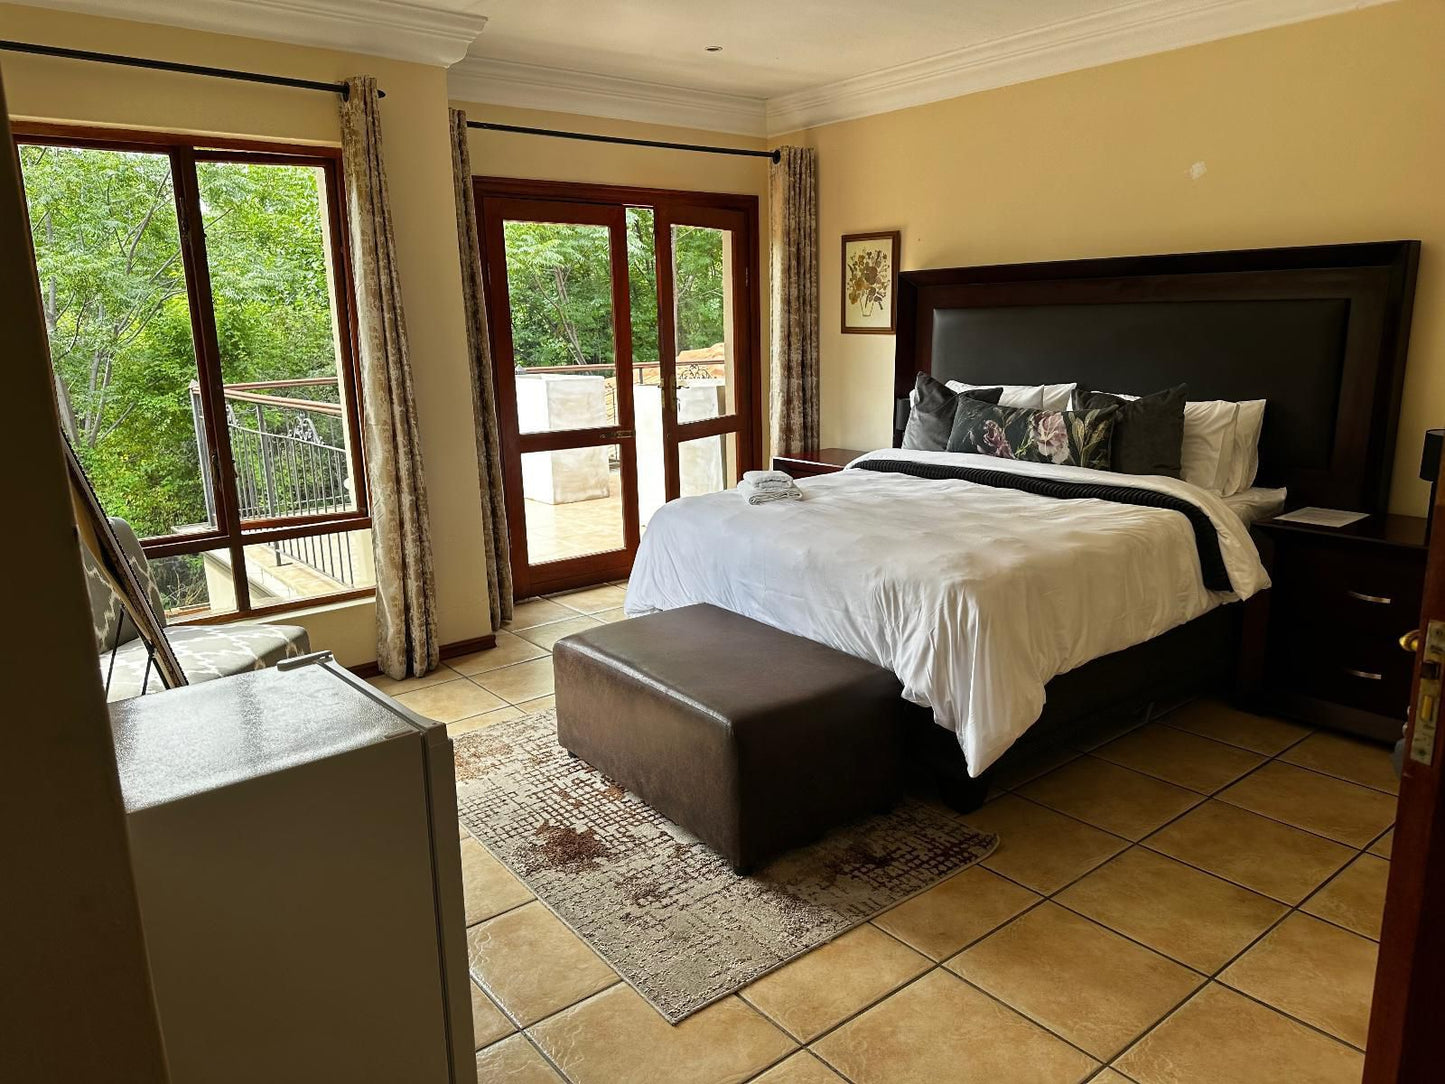 37 On Eagles Pecanwood Estate Hartbeespoort North West Province South Africa Bedroom